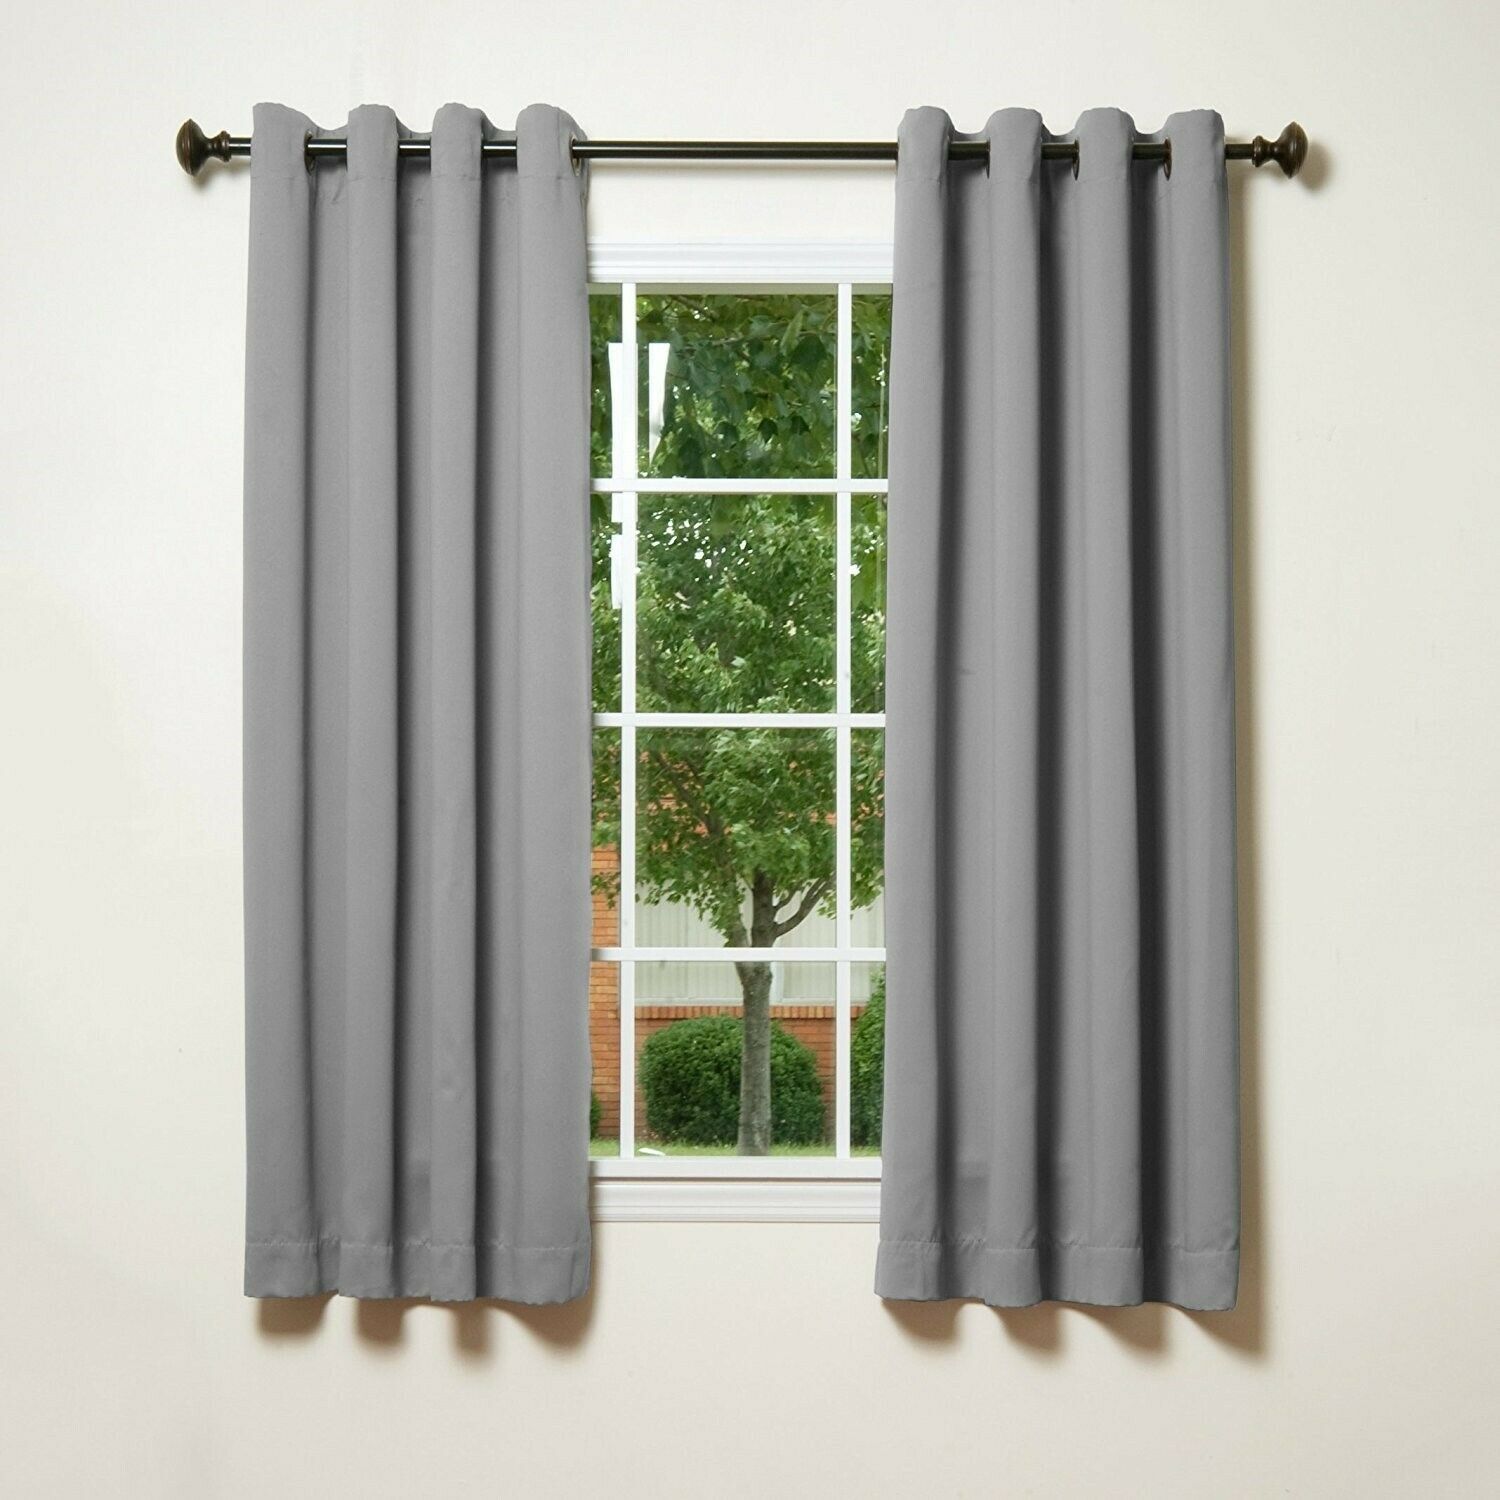 Details About Grey Grommet Top Thermal Insulated Blackout Curtain 52" X 63"  1 Pair 123200 With Regard To Thermal Insulated Blackout Curtain Pairs (View 28 of 30)